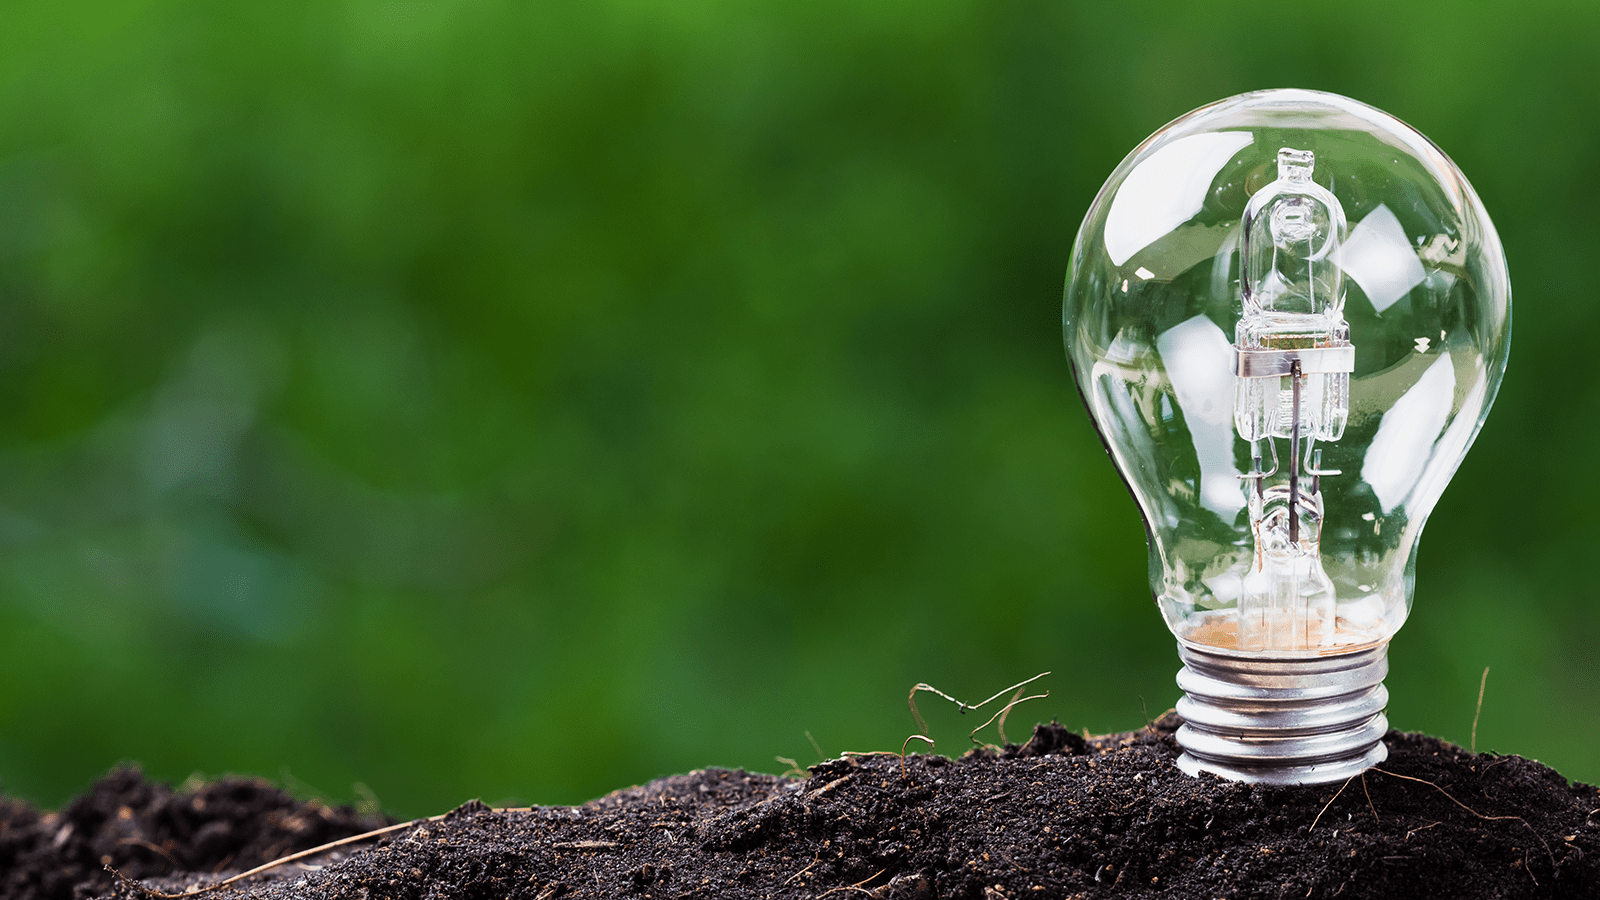 Light bulb plant in soil, representing the concept of sustainable innovation